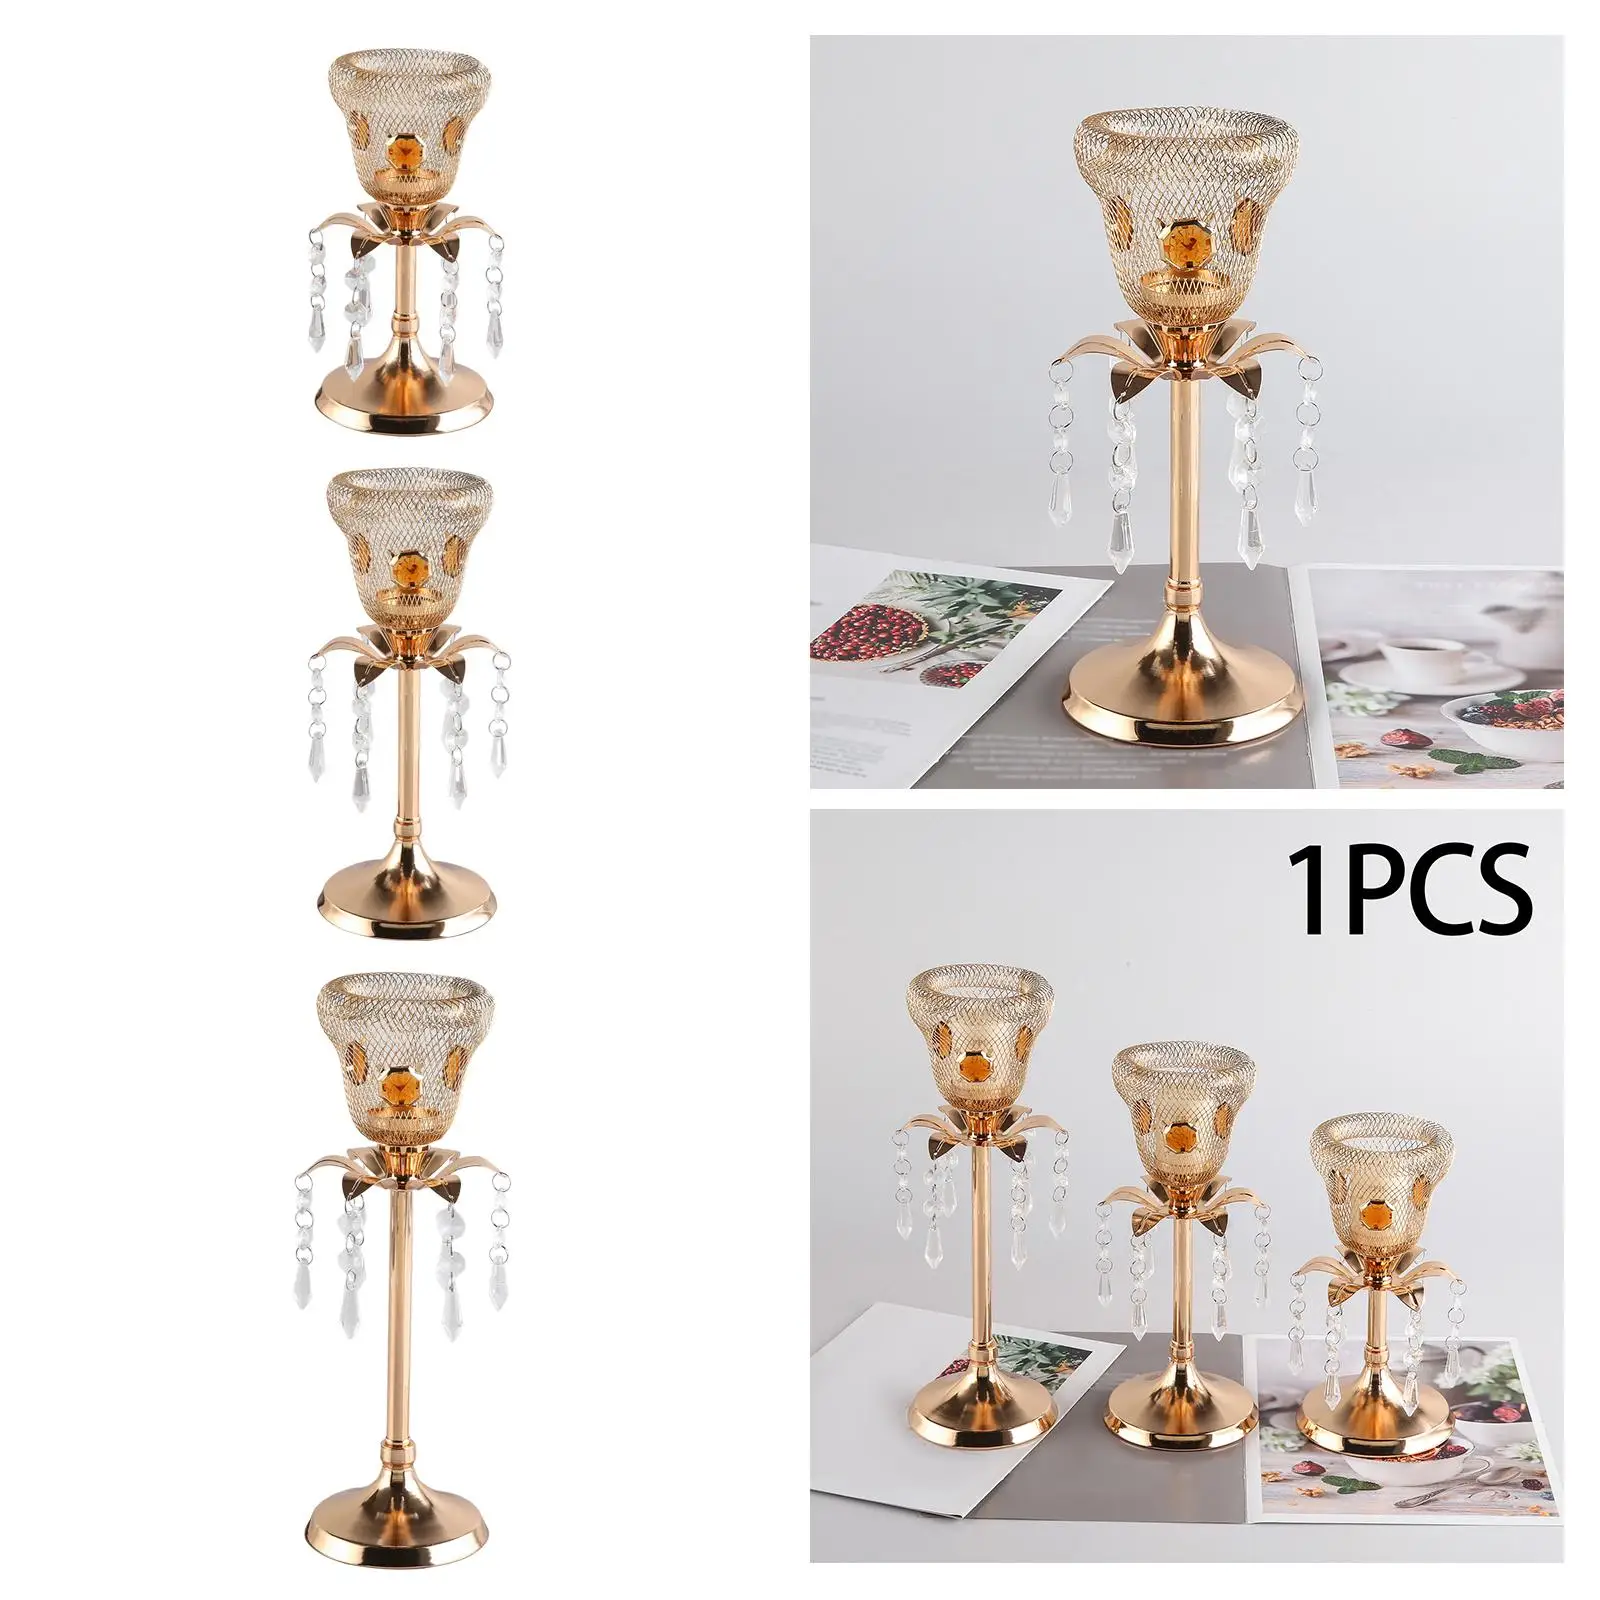 Tealight Candle Holder Modern for Celebration Dining Table Centerpiece Party